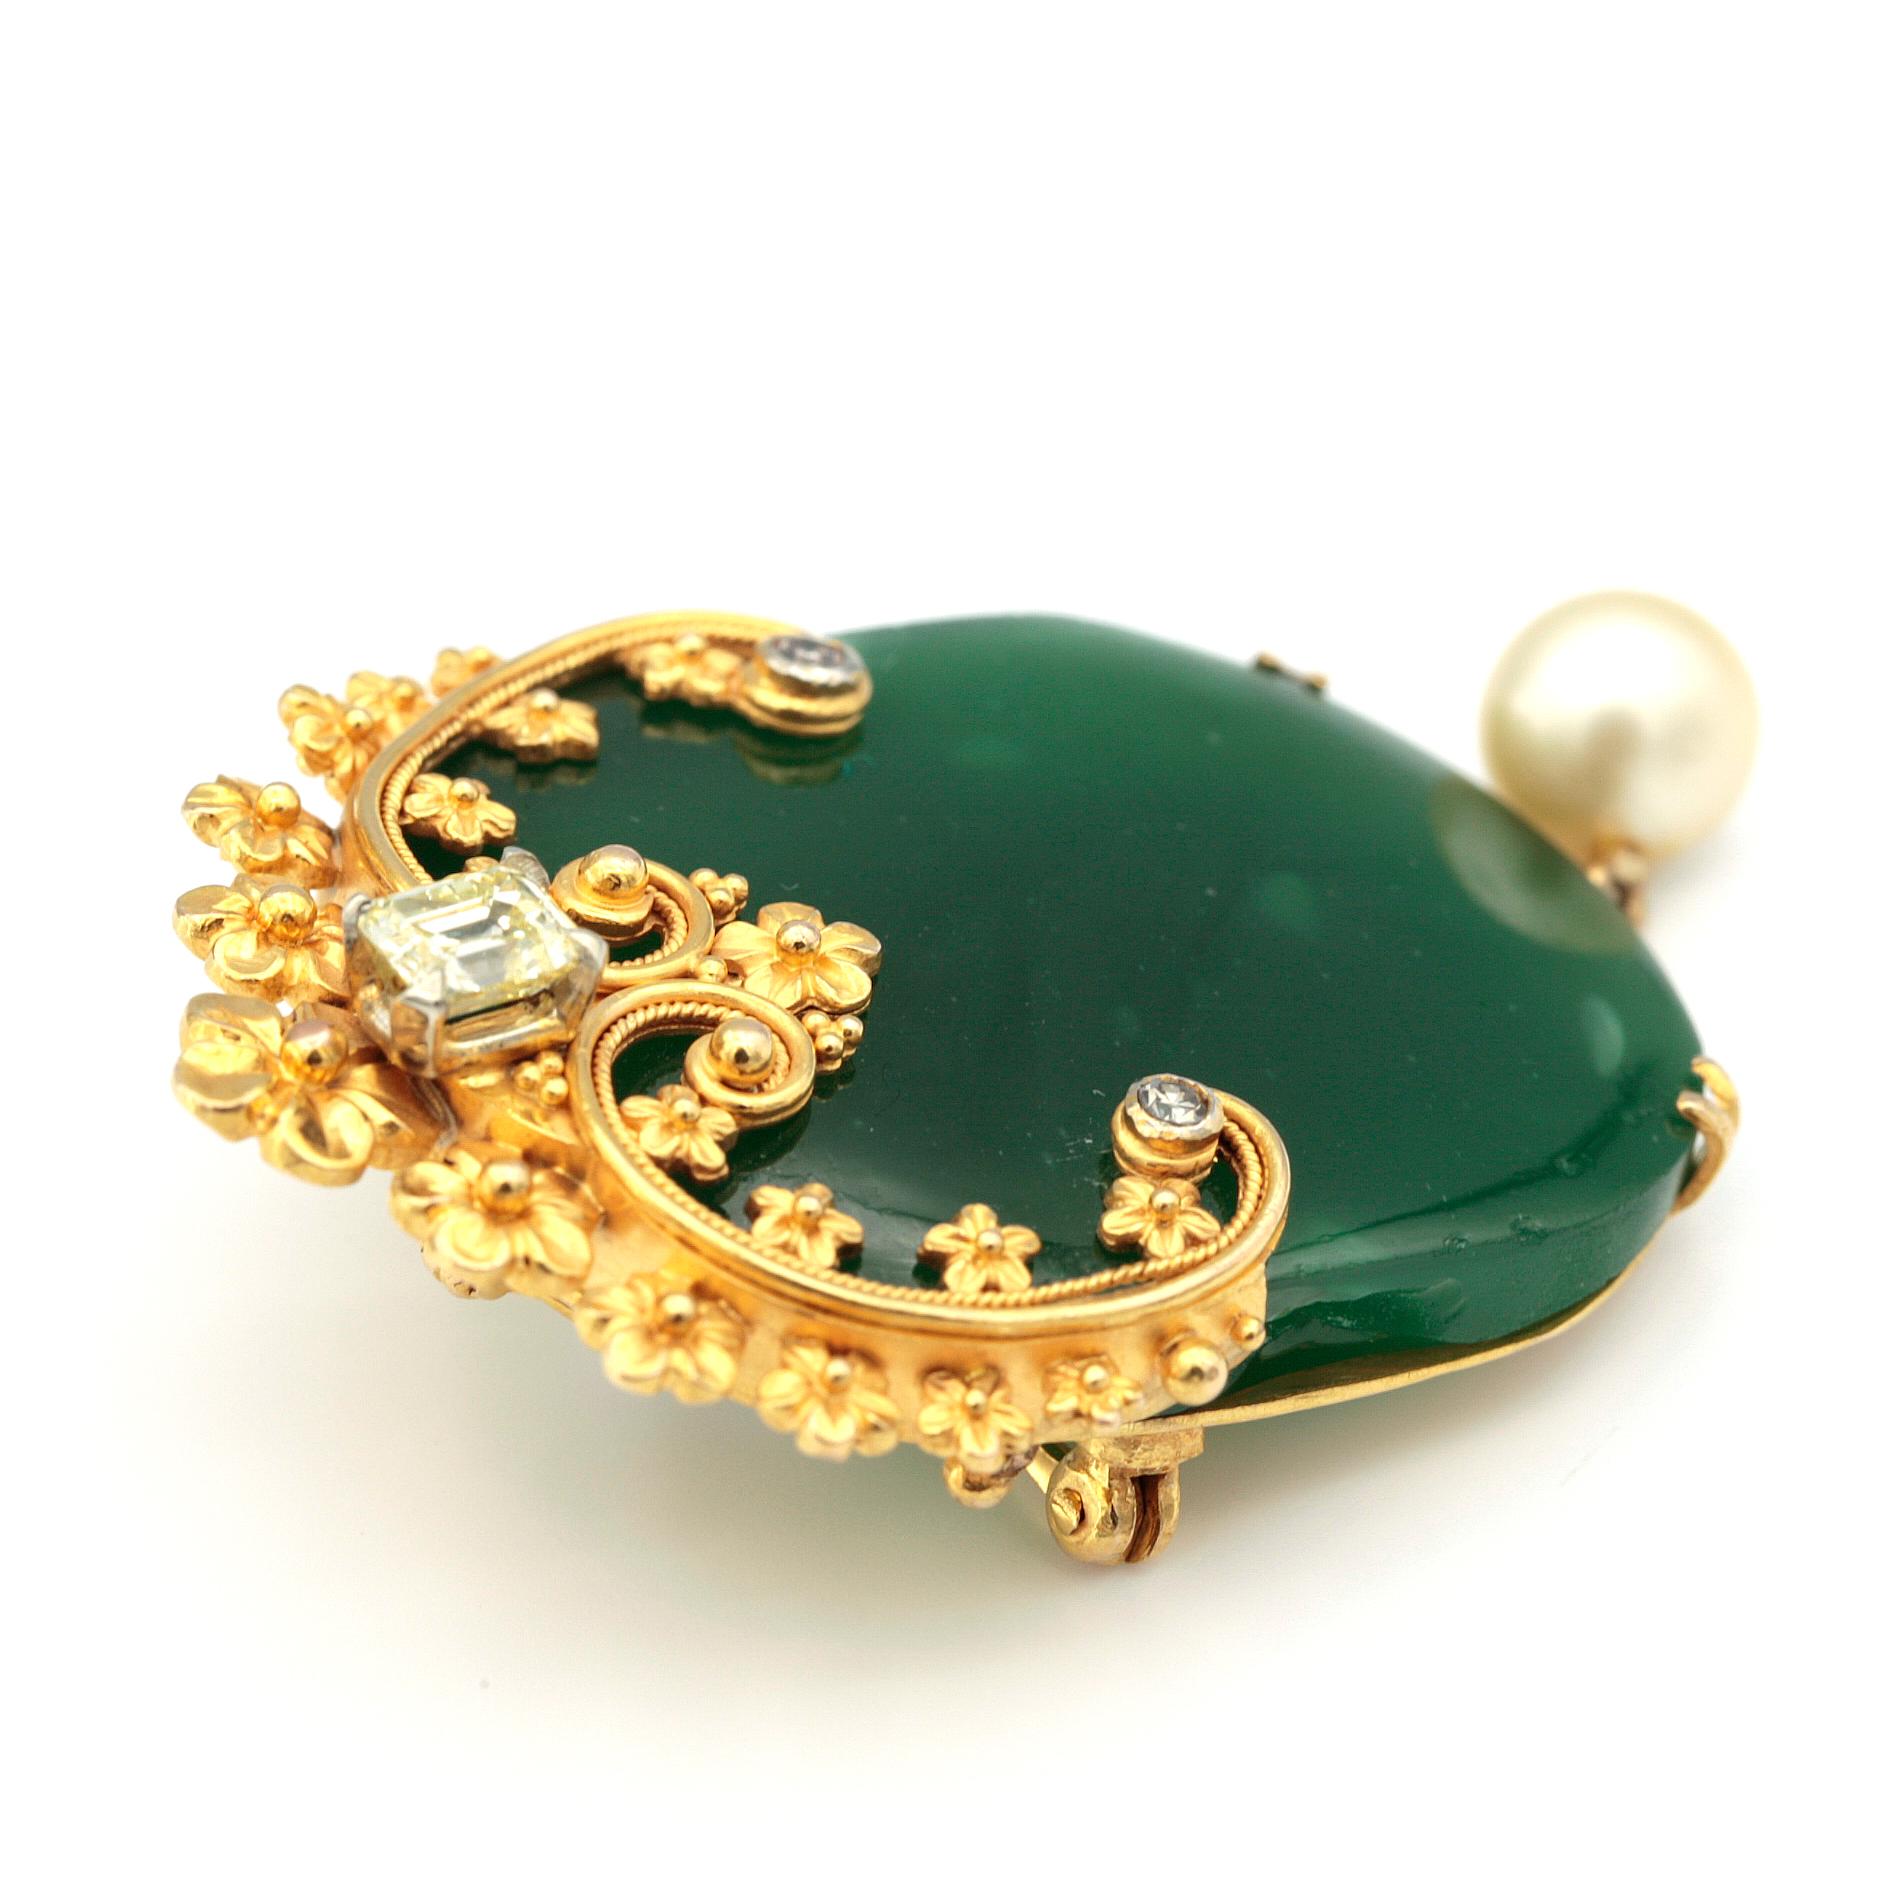 Majestic brooch with a semi-precious green gemstone, set in 10 karat yellow gold frame.
Set on the gold frame, 0.50 carat yellow emerald cut diamond and two round diamonds 0.07 carat each.
dangling from the brooch is a white pearl.
23.54 grams
4.3cm